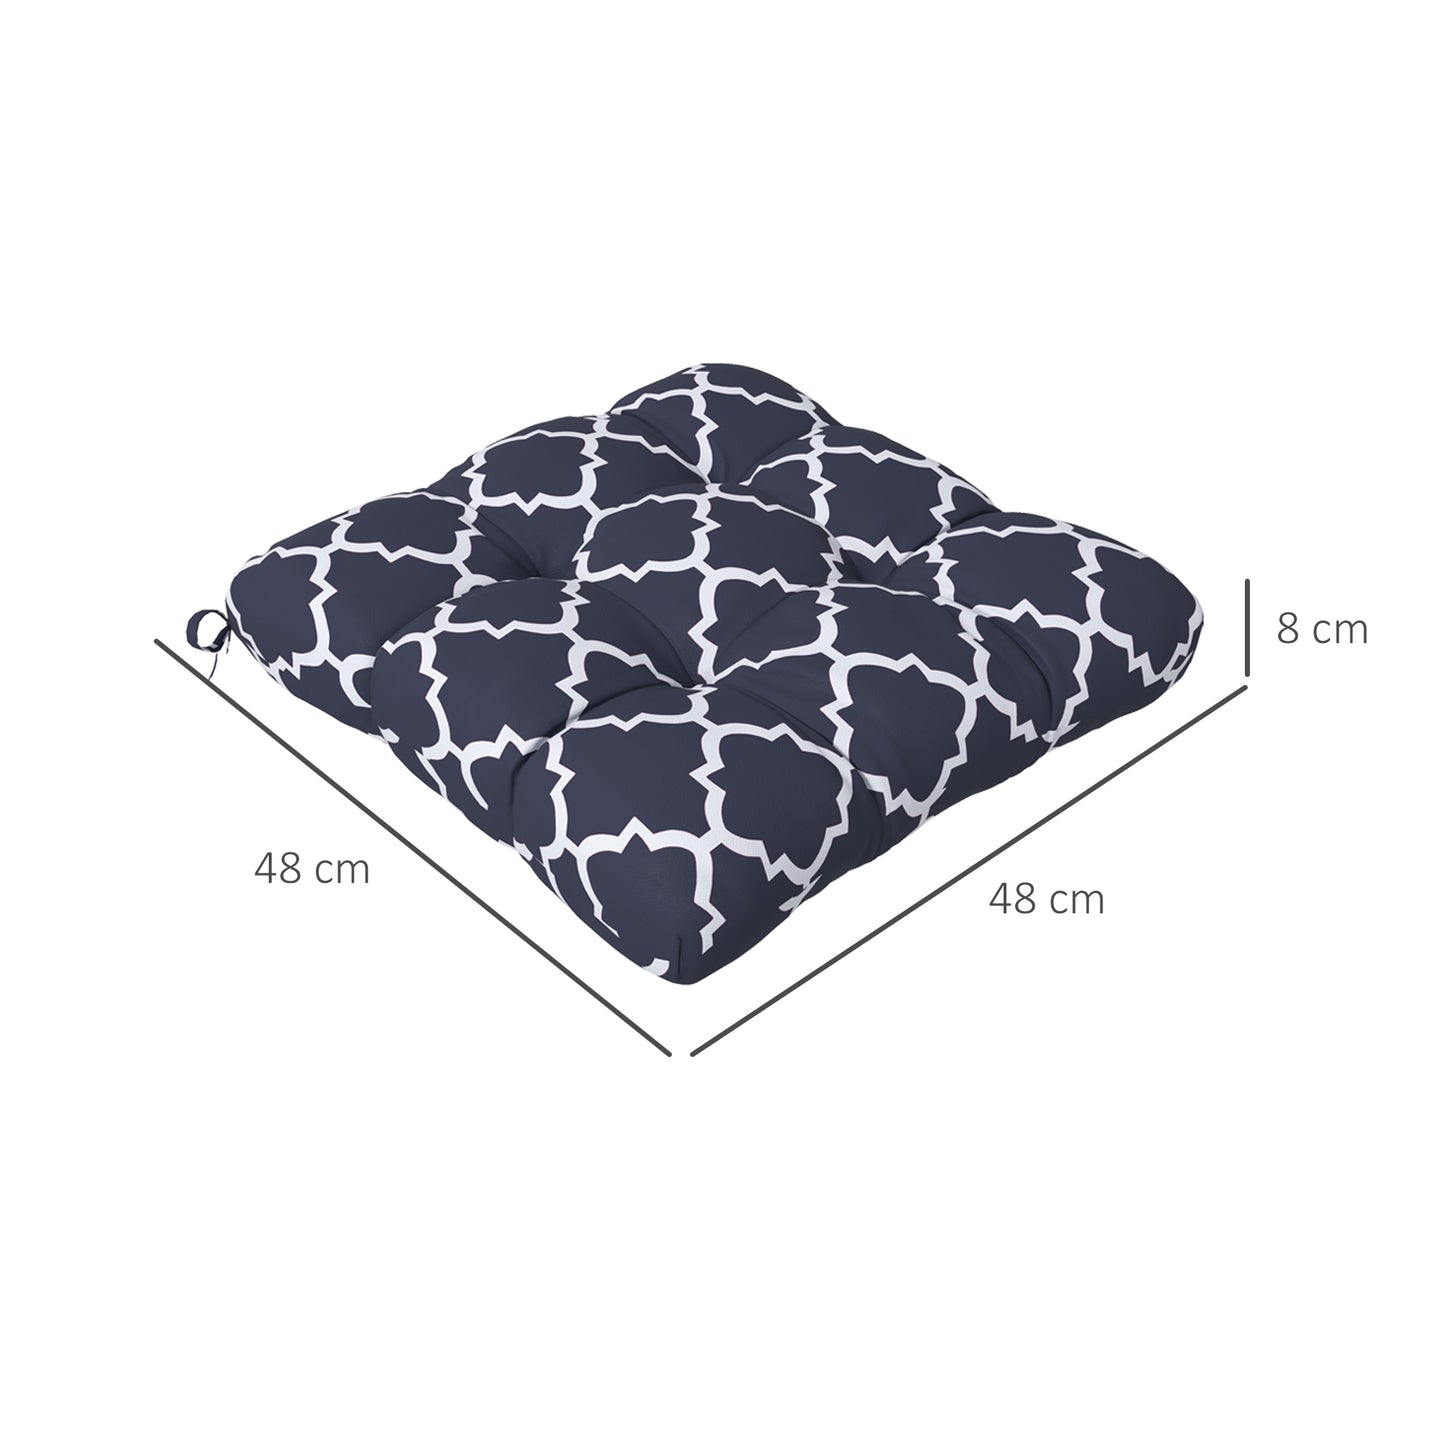 Outsunny Replacement Cushions: 4-Piece Indoor Outdoor Seat Pads with Ties for Patio Chairs, Blue